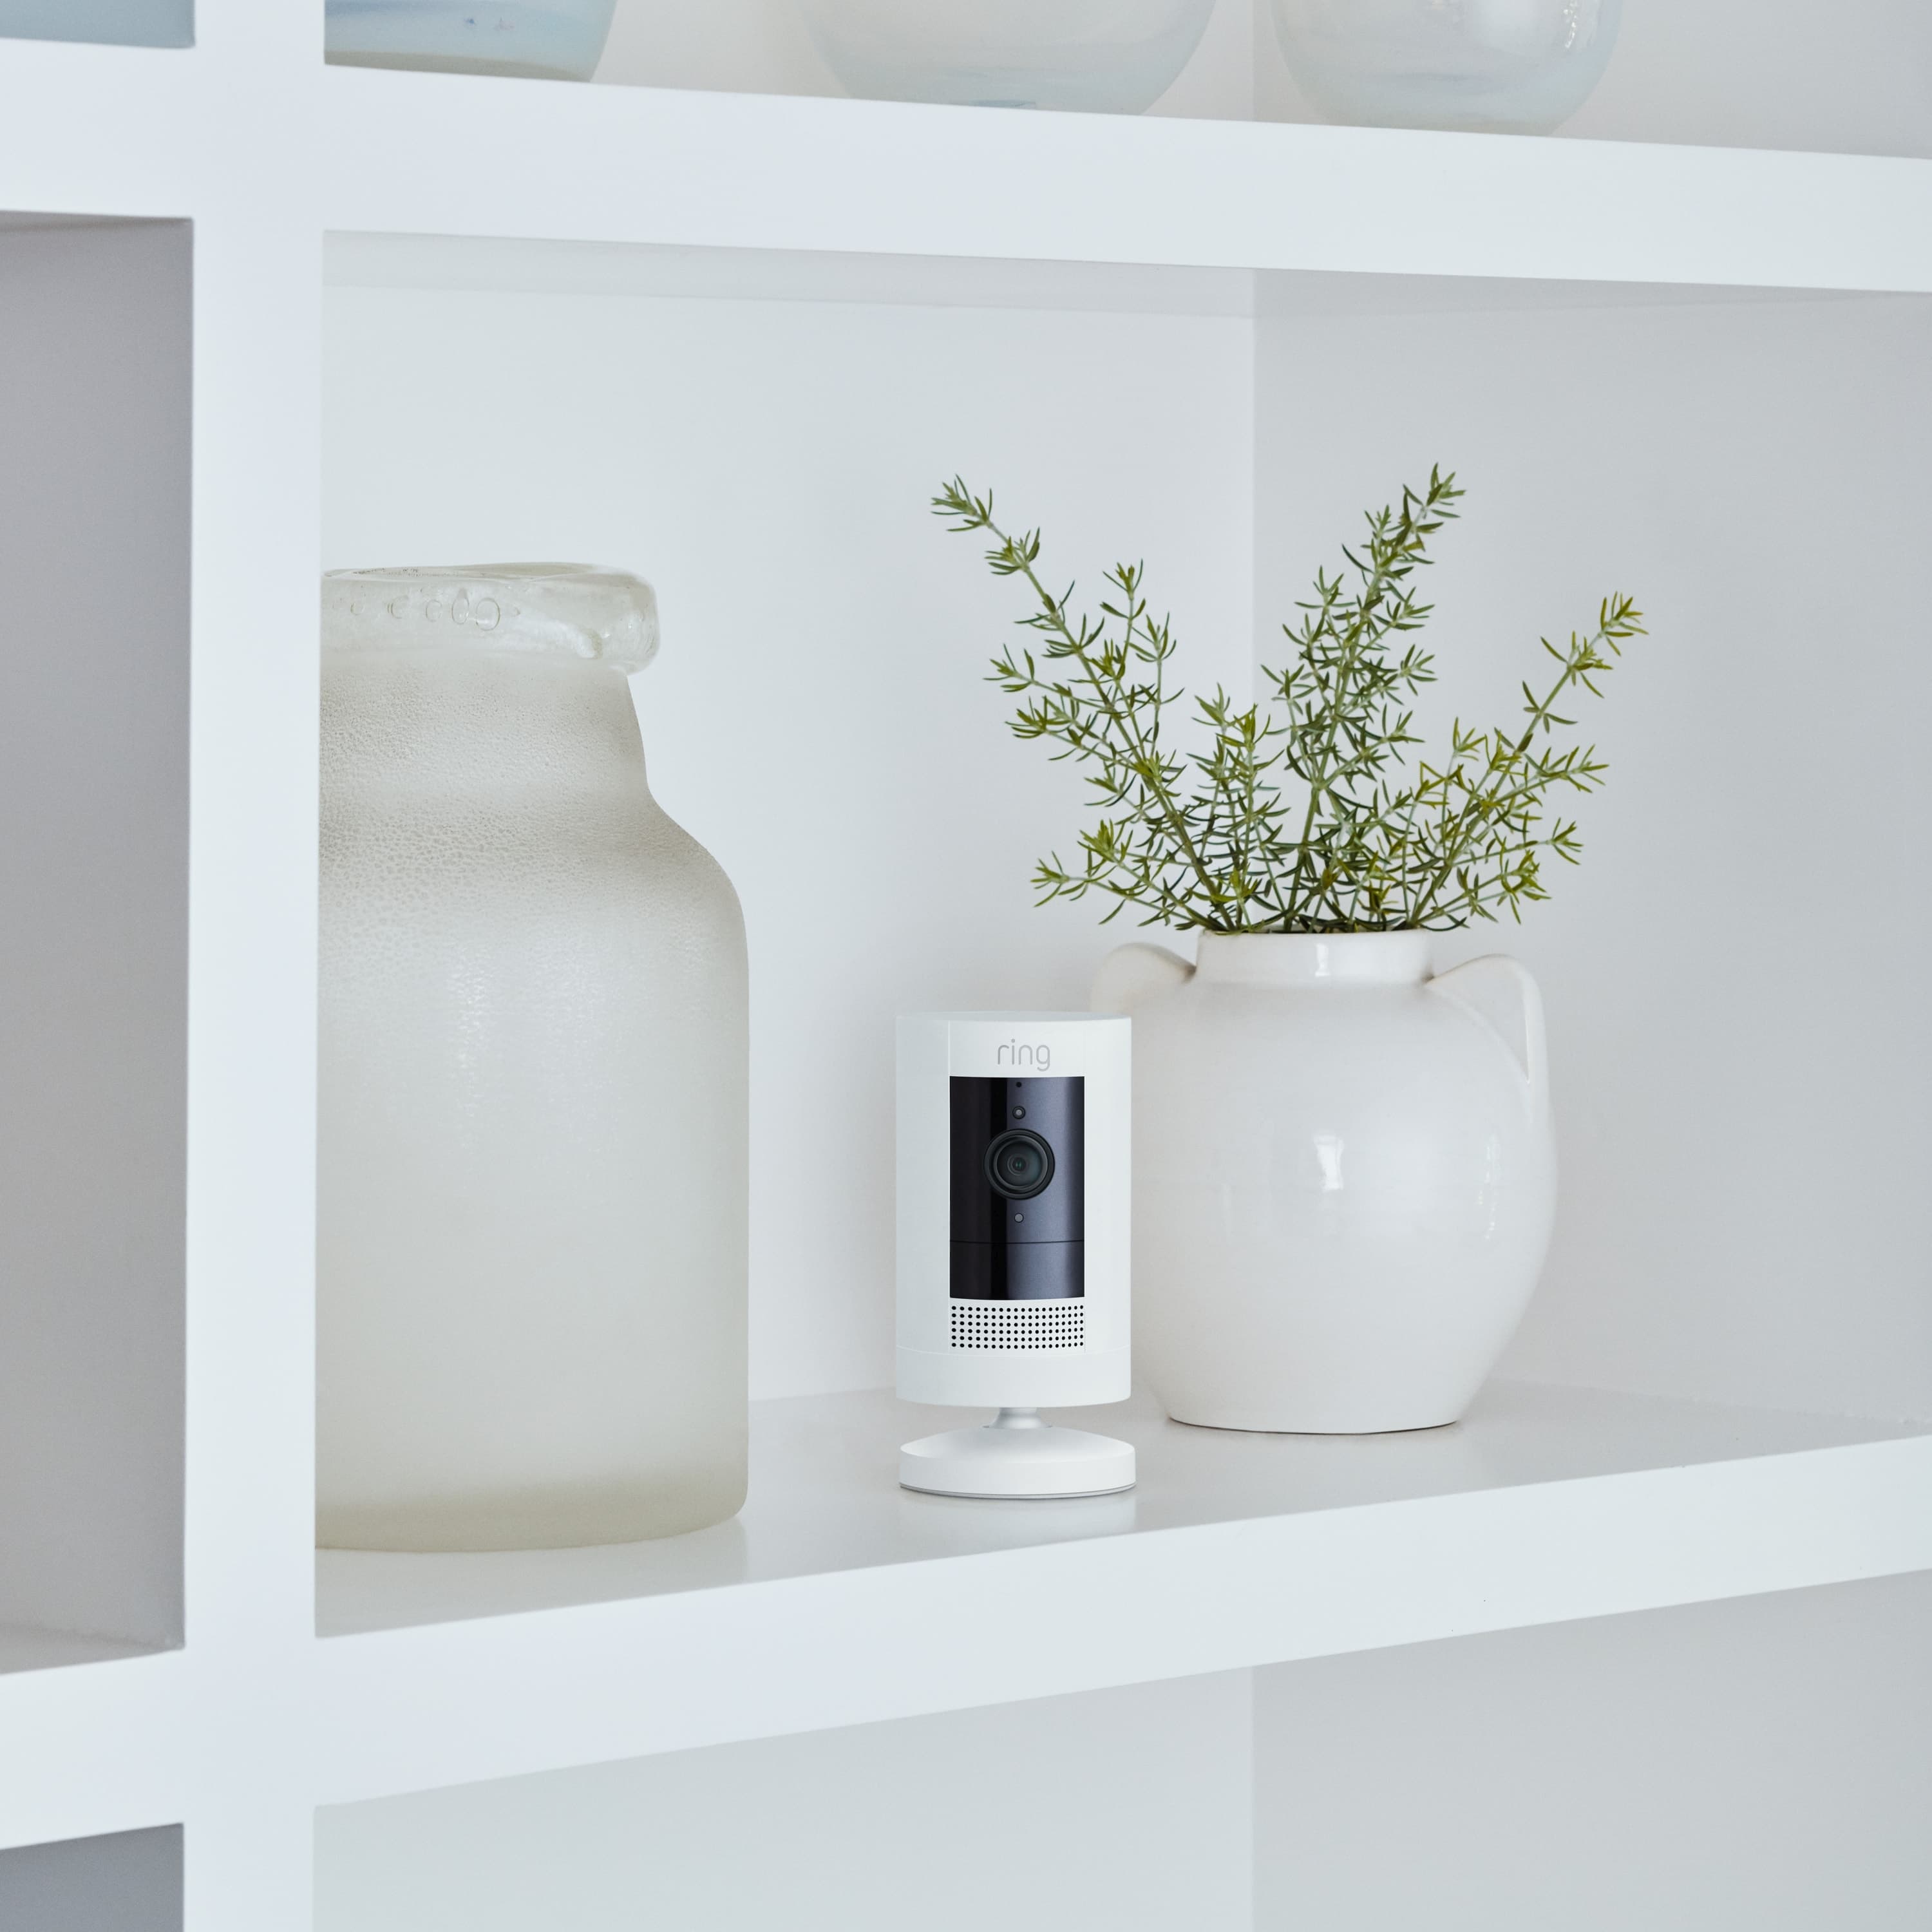 2-Pack Stick Up Cam Battery (for Certified Refurbished) - Inside a home, Stick Up Cam, Battery model in white, is situated on a shelf between 2 vases.